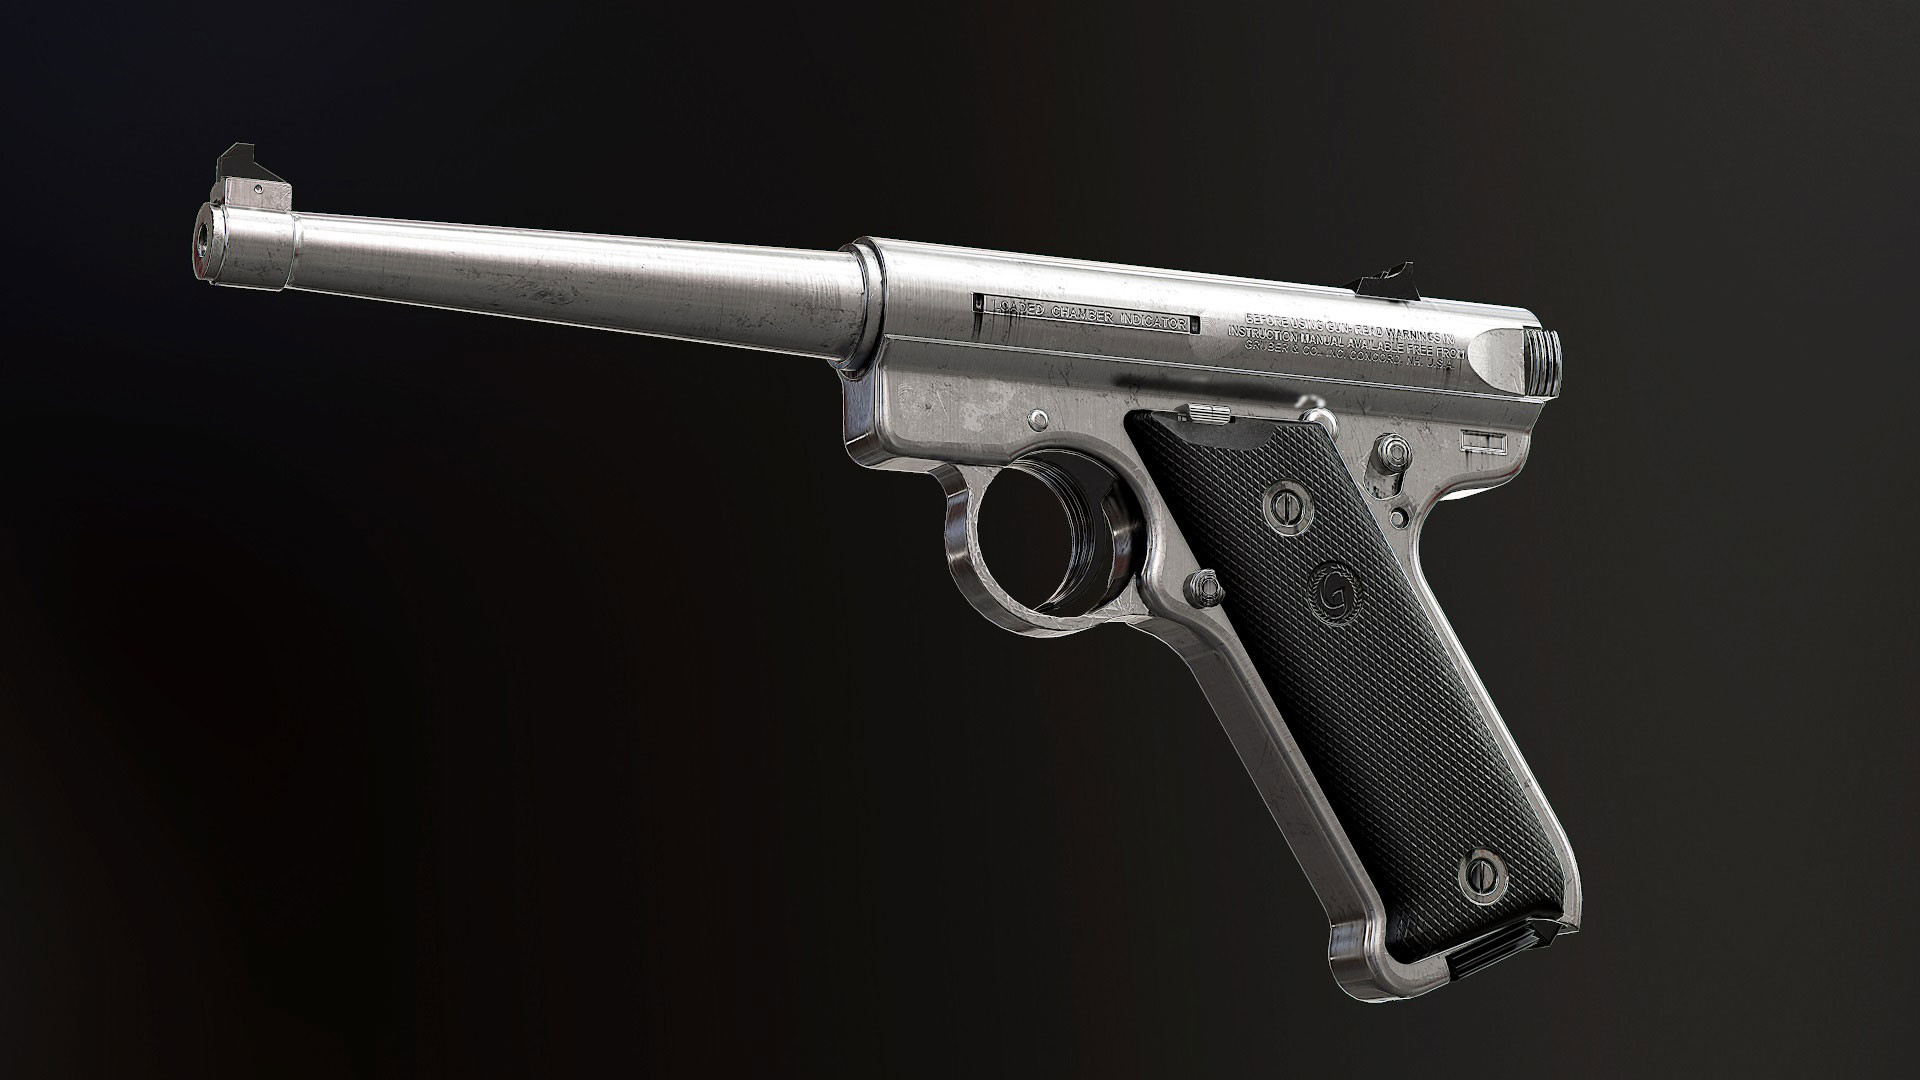 1920x1080 chamferzone_RugerMK3_b. chamferzone_ruger_fps. chamferzone_RugerMK3_a.  chamferzone_RugerMK3_e